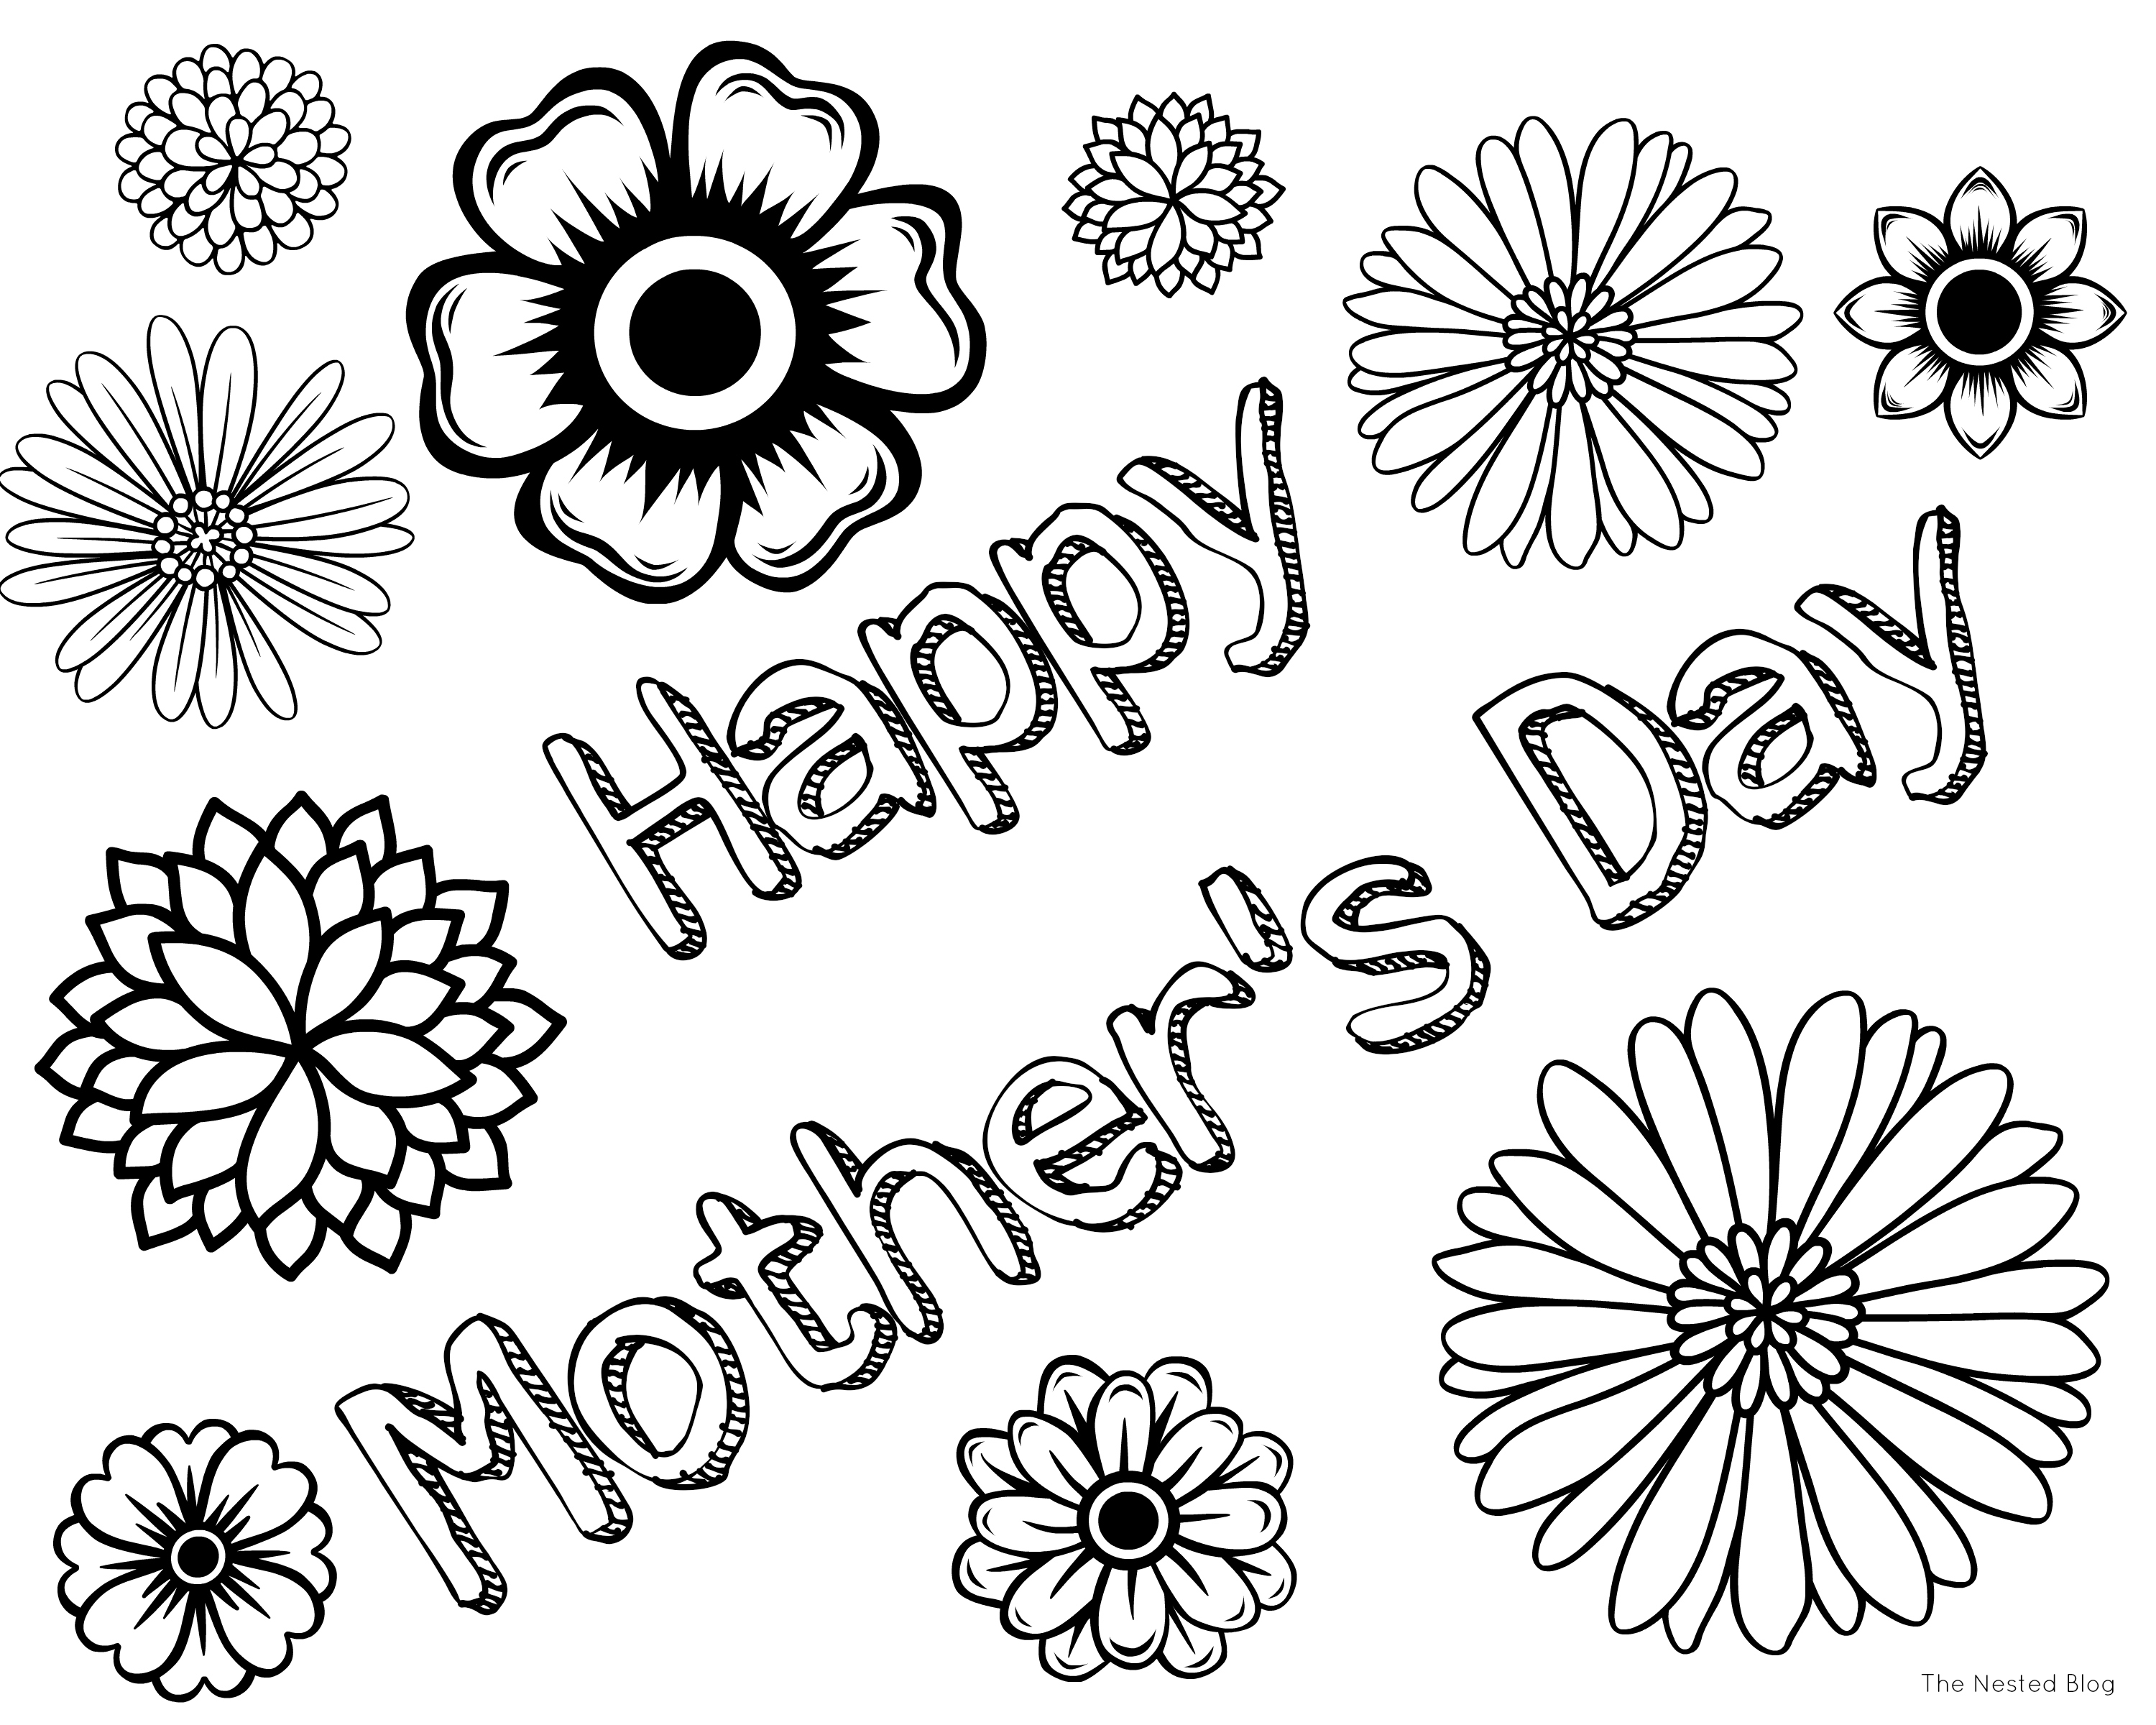 Cute Happy Mothers Day Coloring Pages To Print with simple drawing